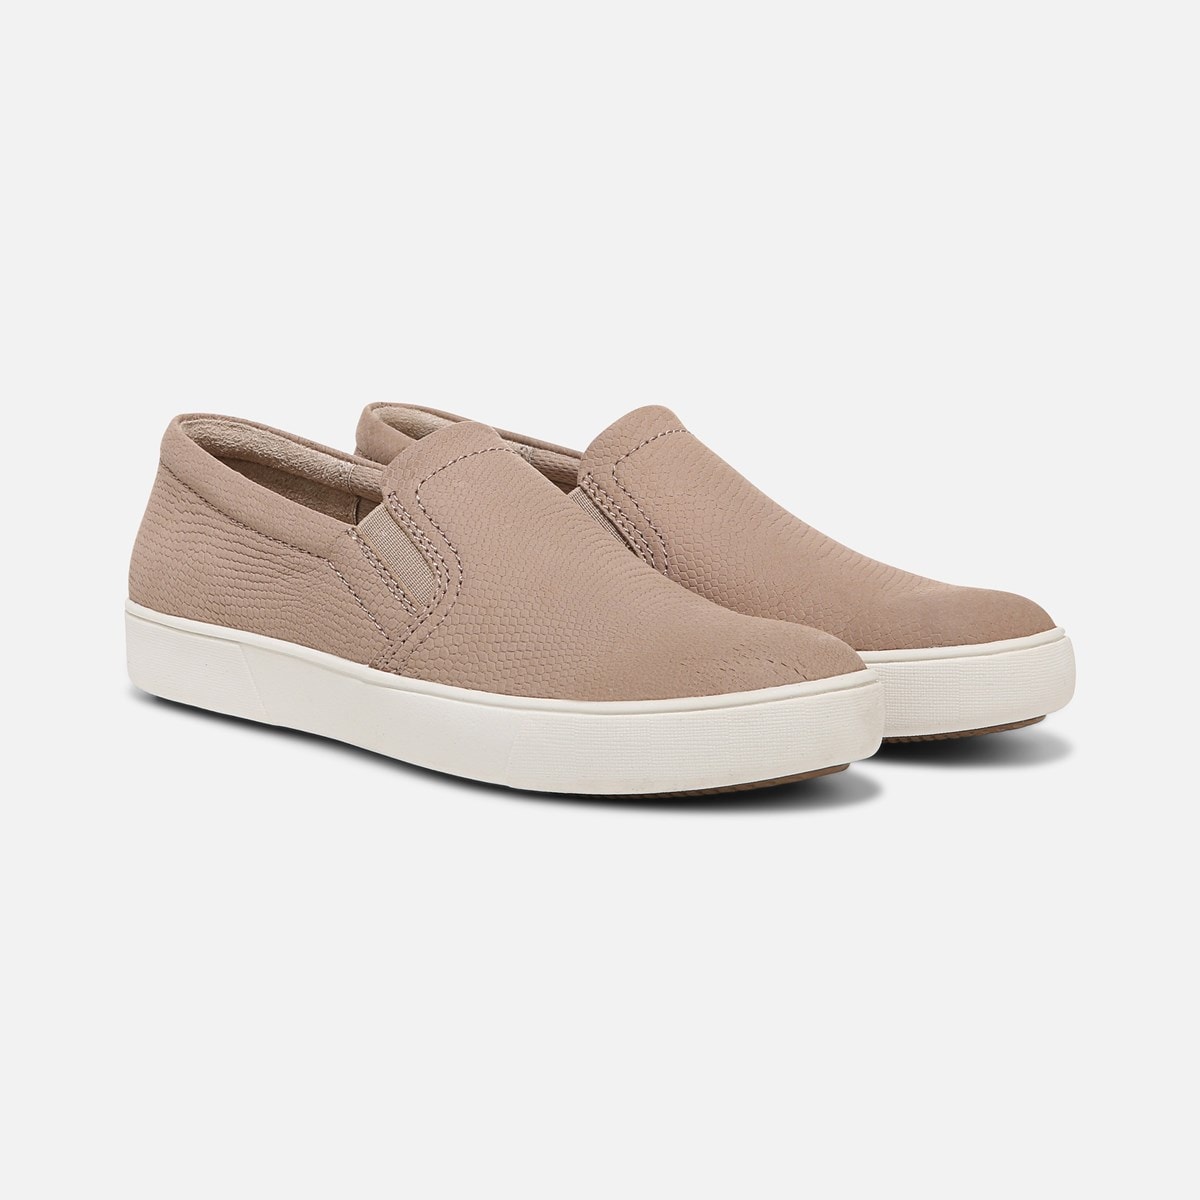 naturalizer sneakers marianne